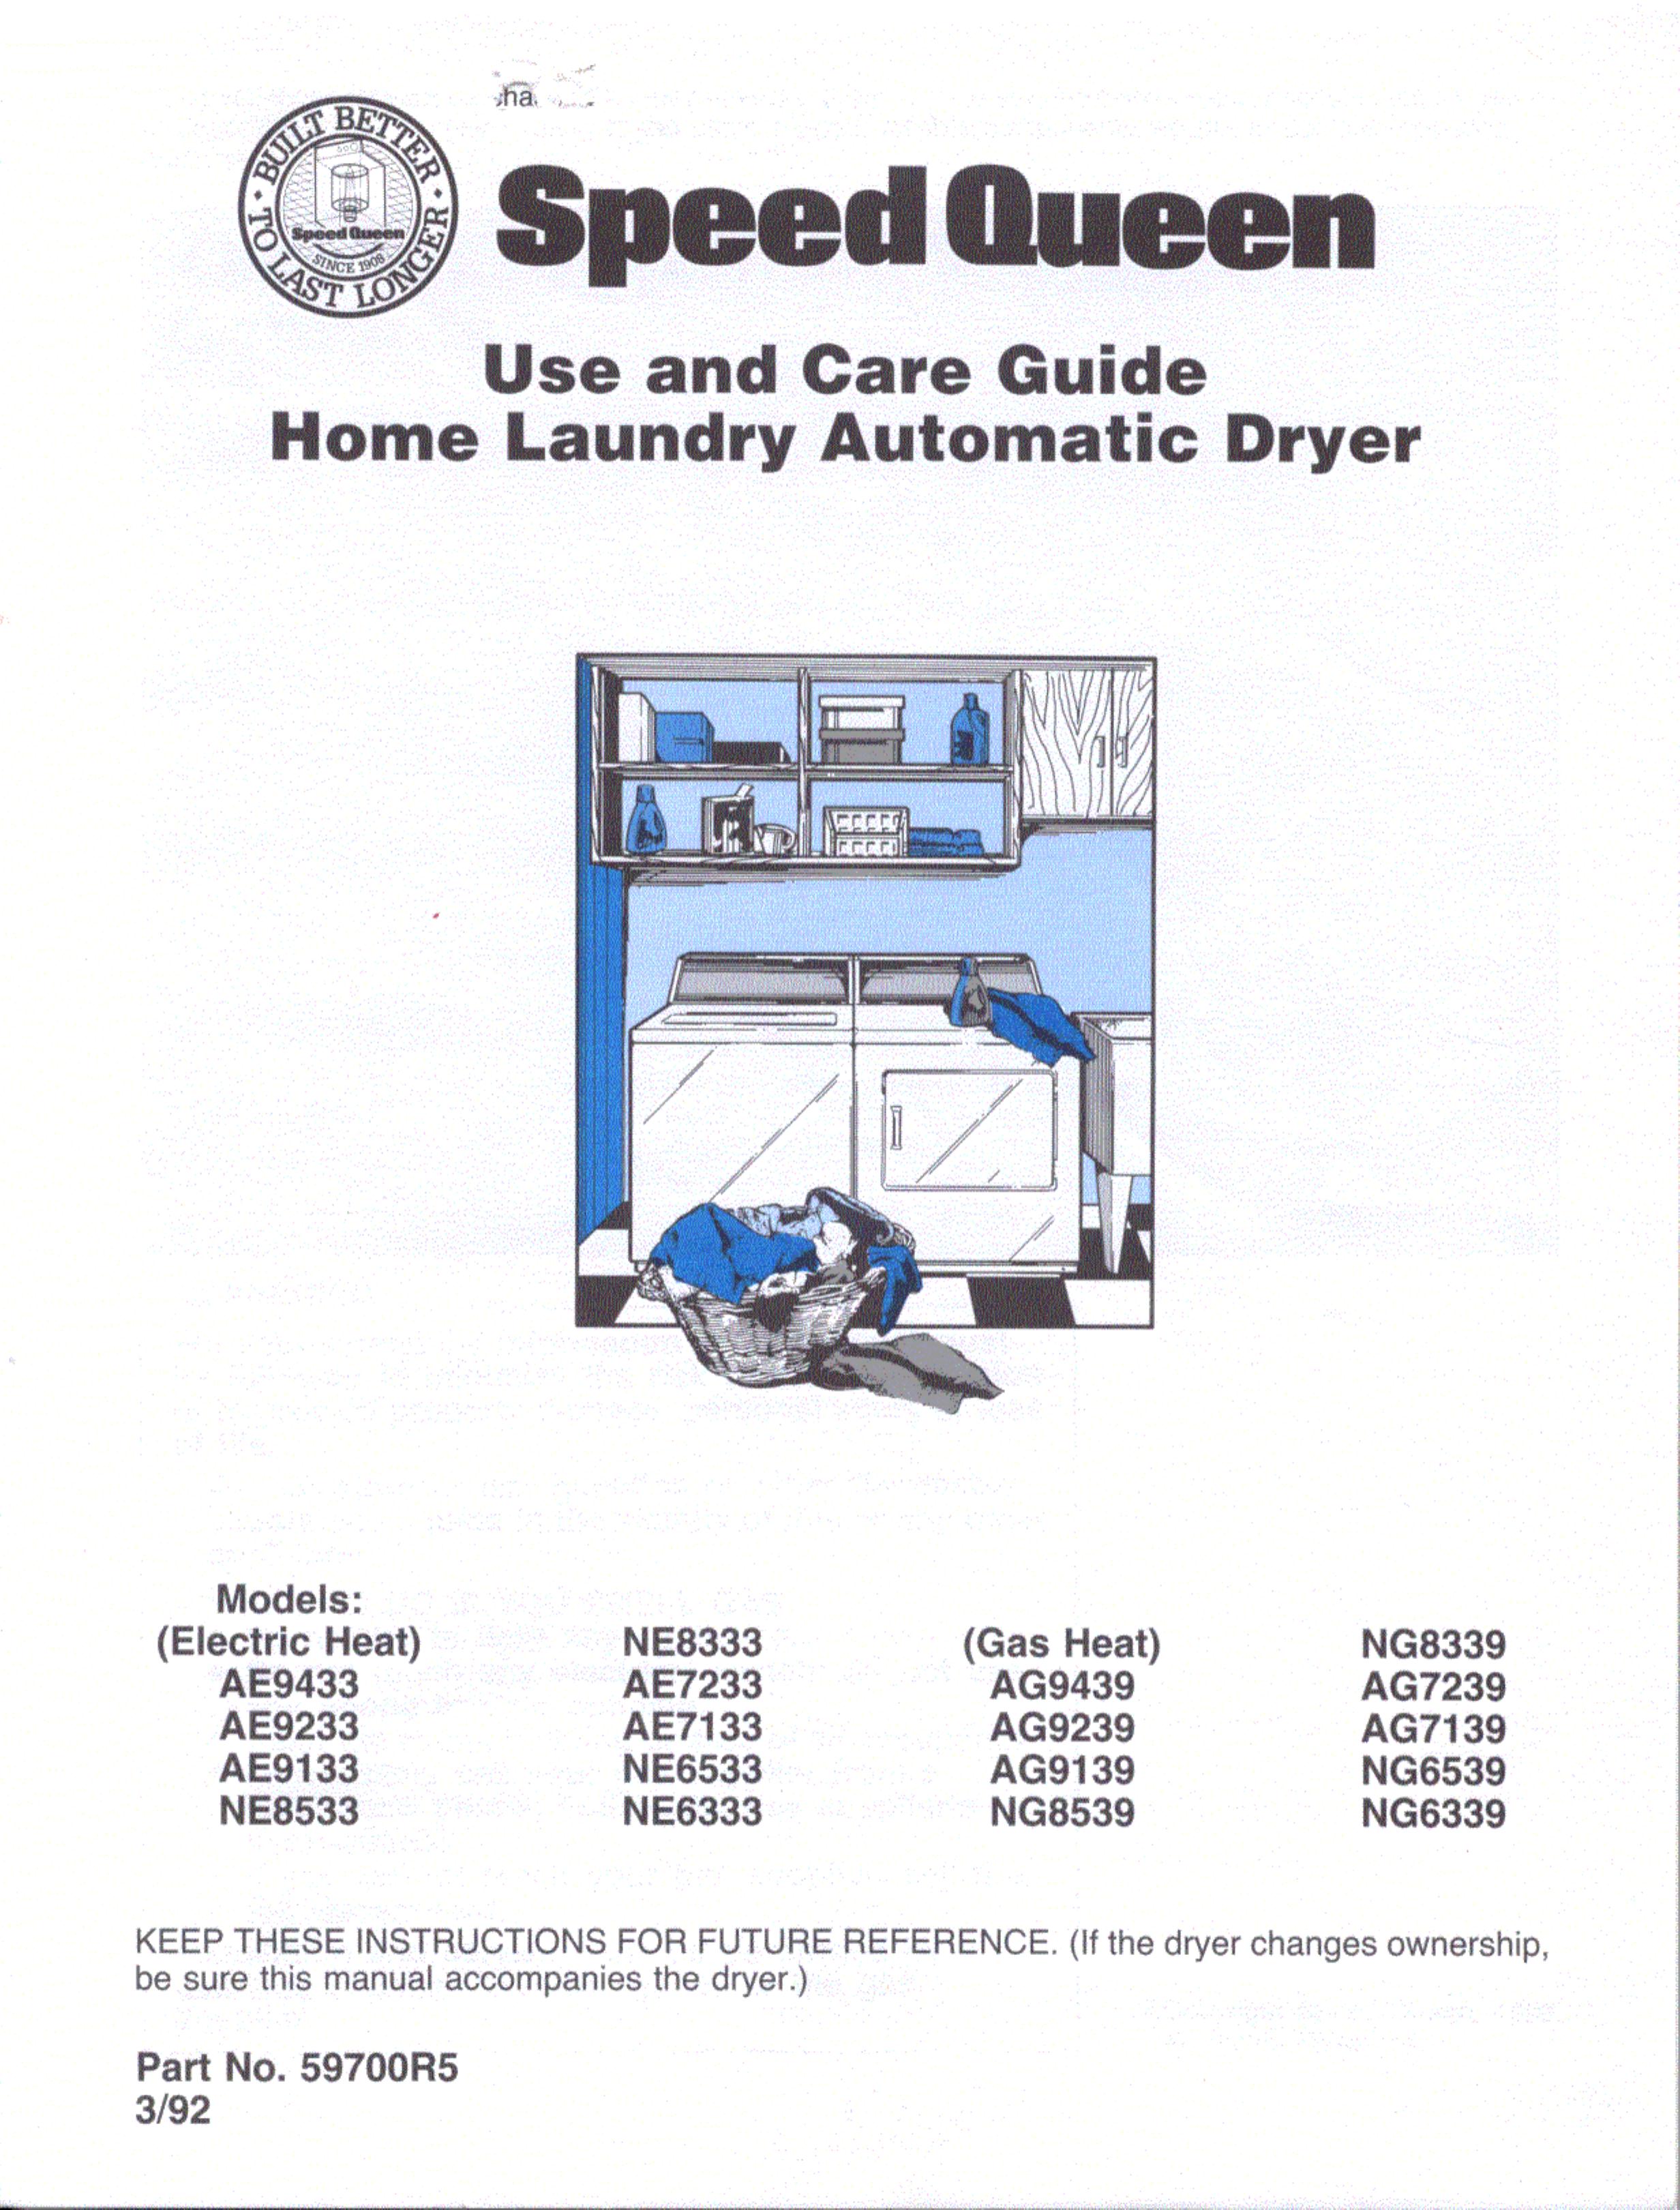 Speed Queen AE7233 Clothes Dryer User Manual